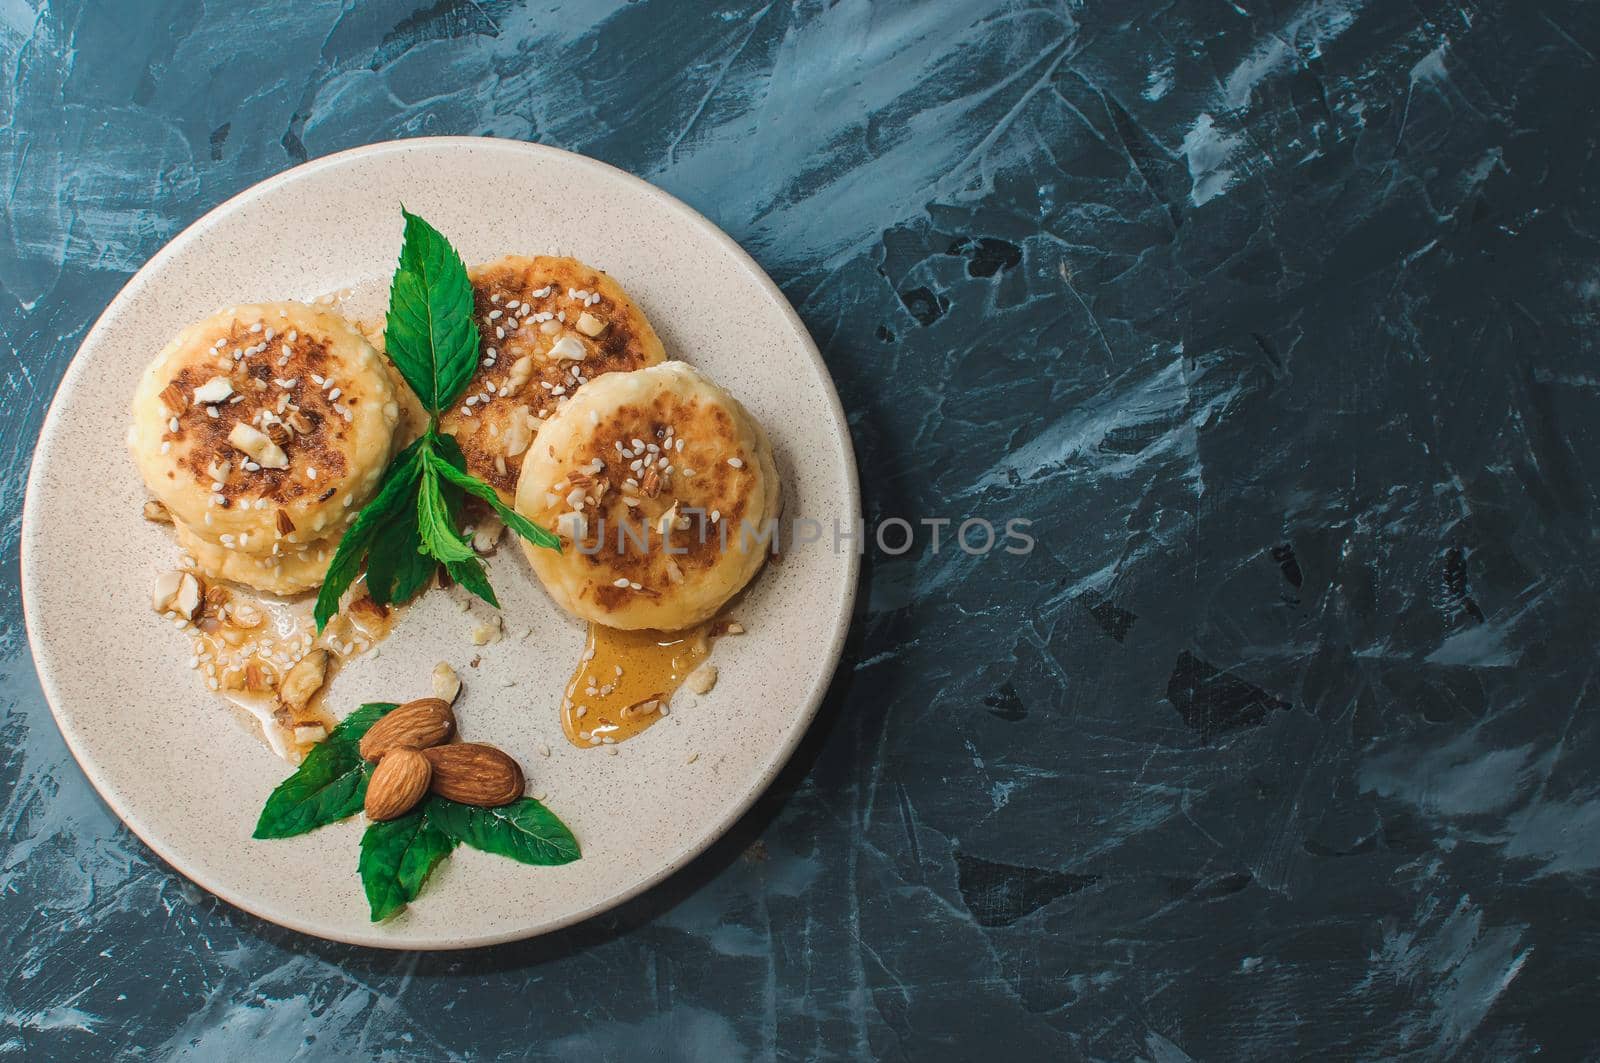 Cheesecakes,cottage cheese pancakes with almonds,fresh mint and maple syrup on a gray background from a concrete table copy space. Cheesecakes, homemade traditional Ukrainian and Russian cheesecakes